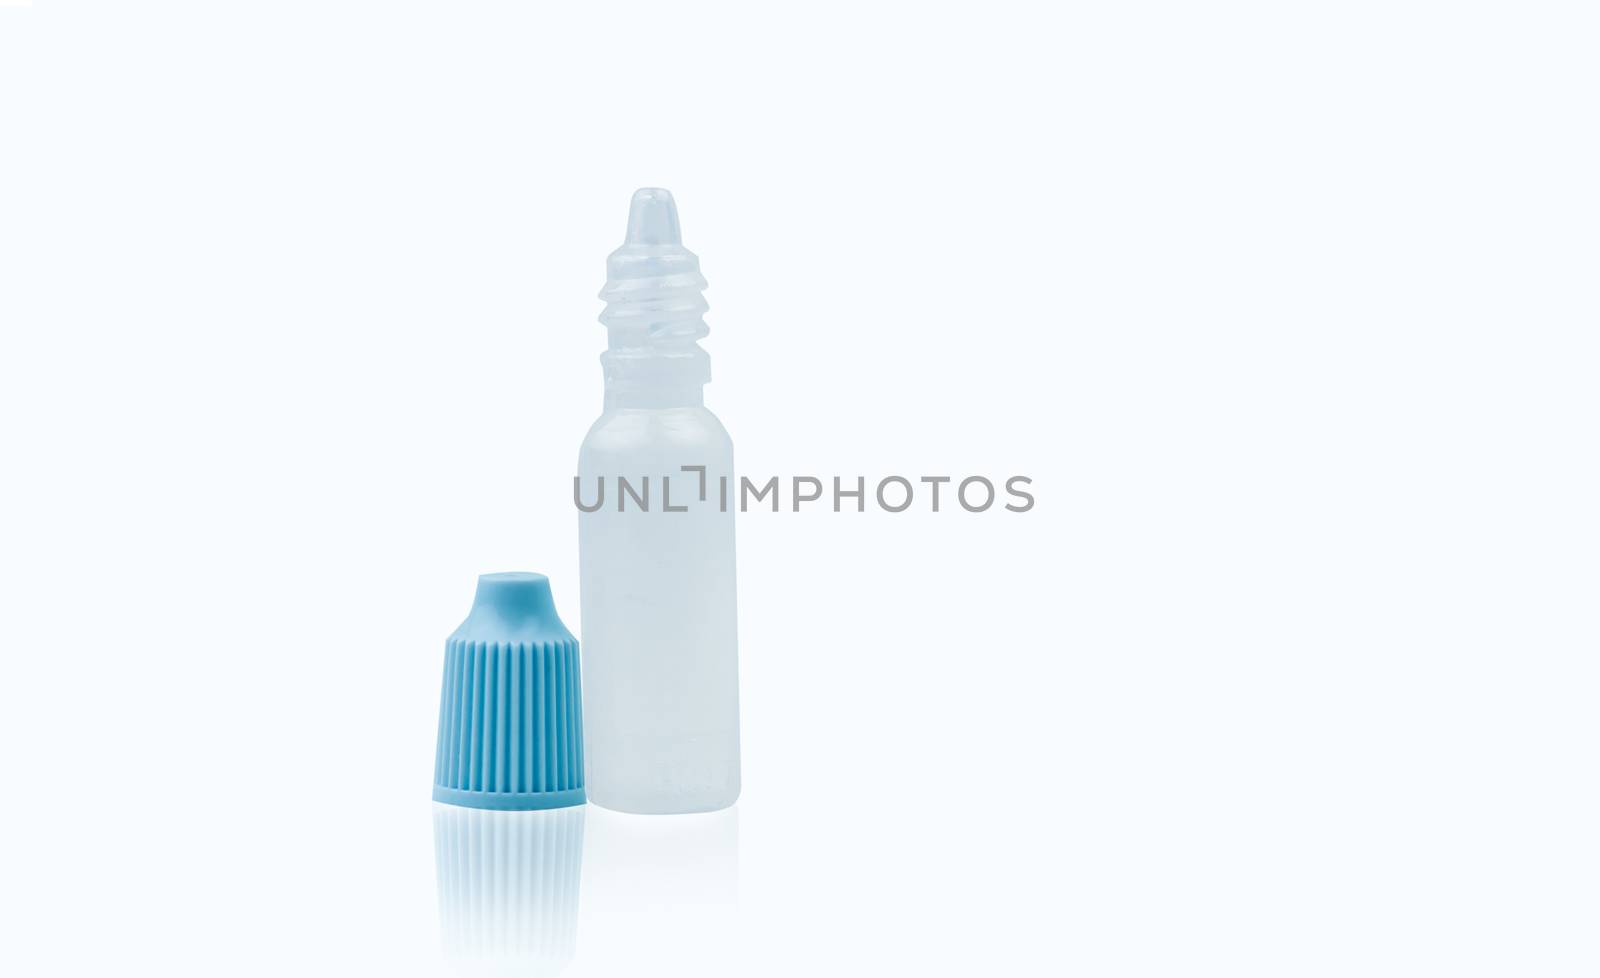 Eye drops bottle with opened blue cap isolated on white background with blank label and copy space, just add your own text.